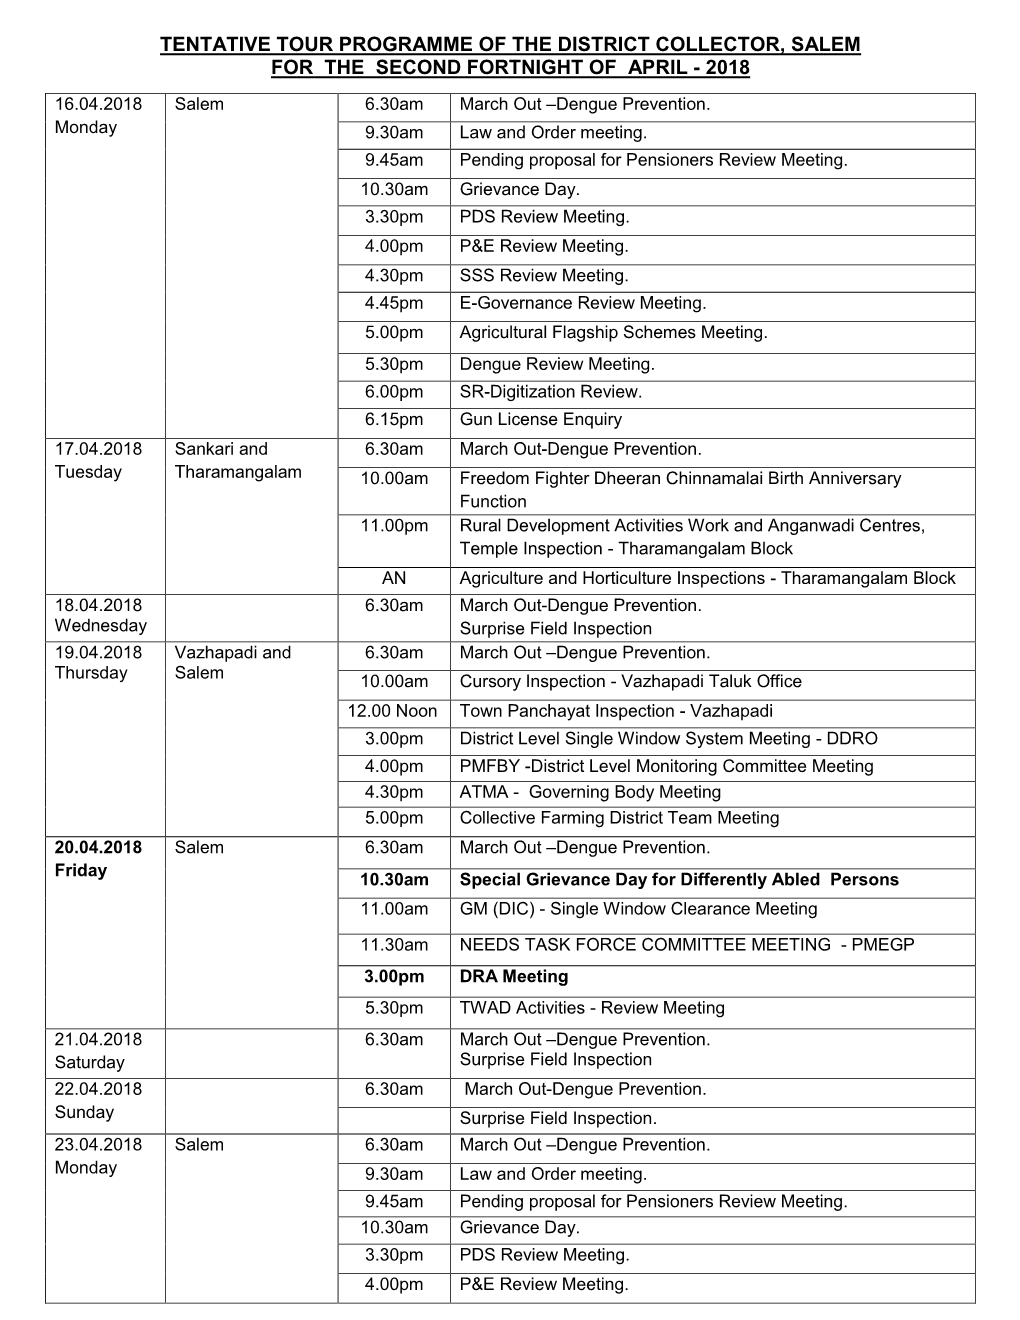 Tentative Tour Programme of the District Collector, Salem for the Second Fortnight of April - 2018